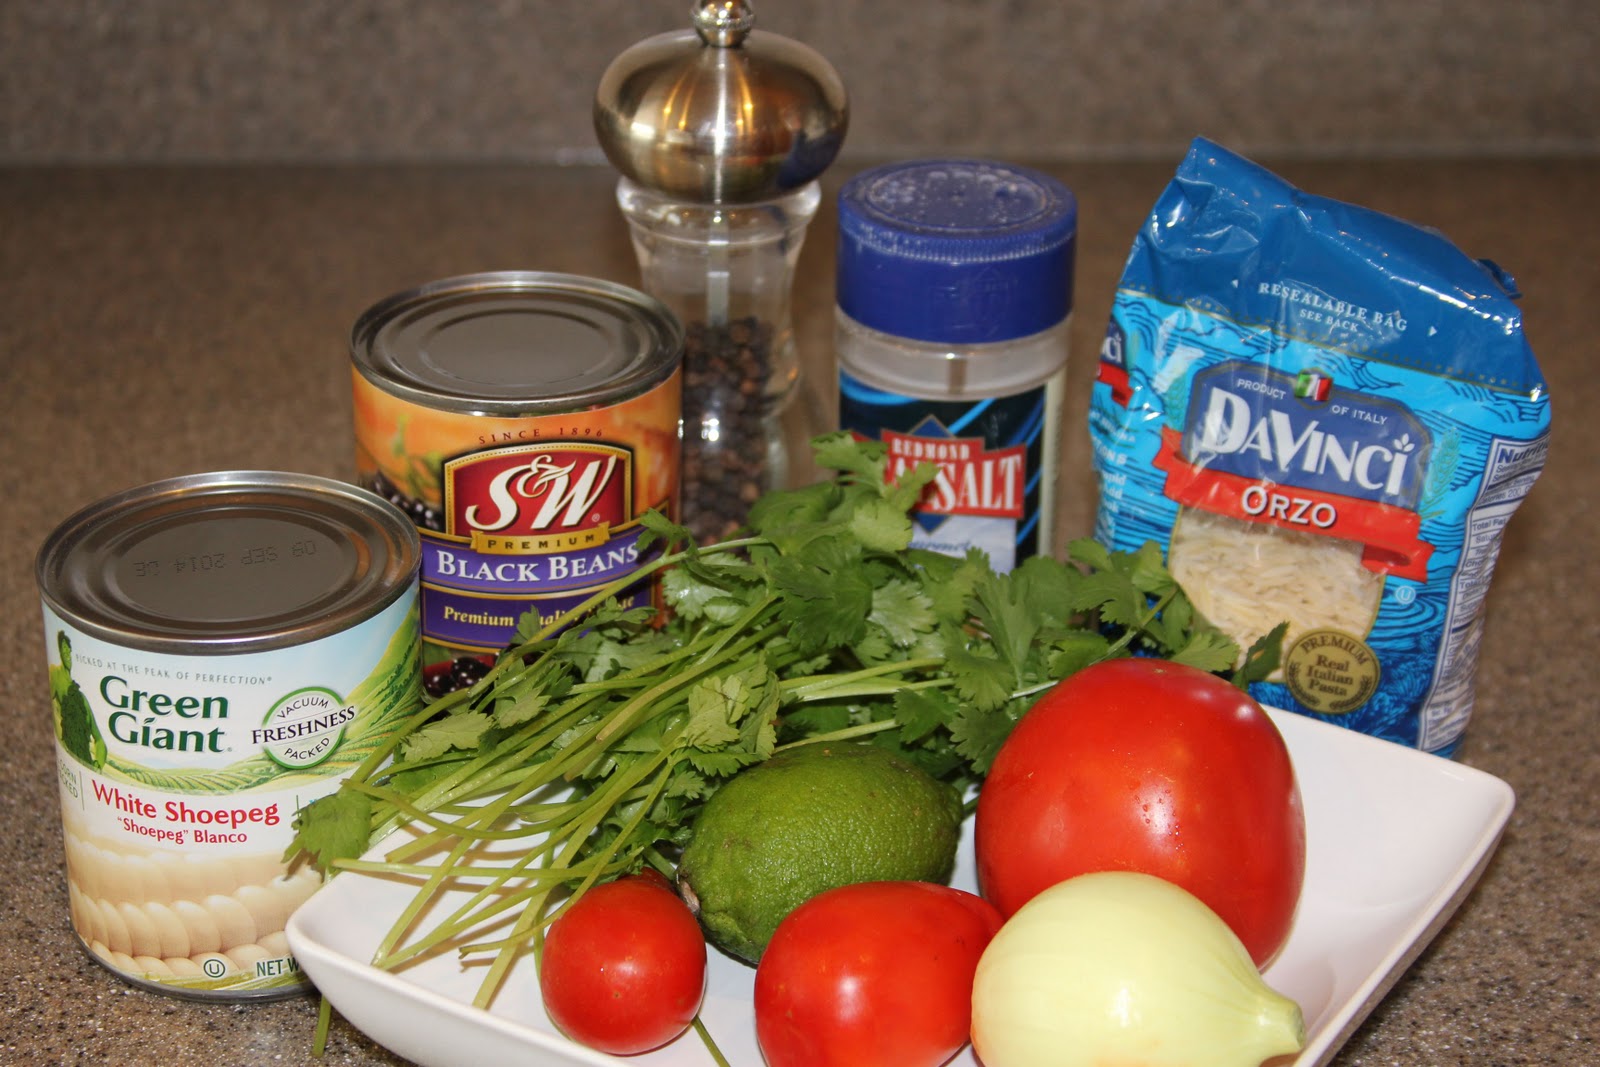 Southwest Orzo Pasta - Cooking With Ruthie